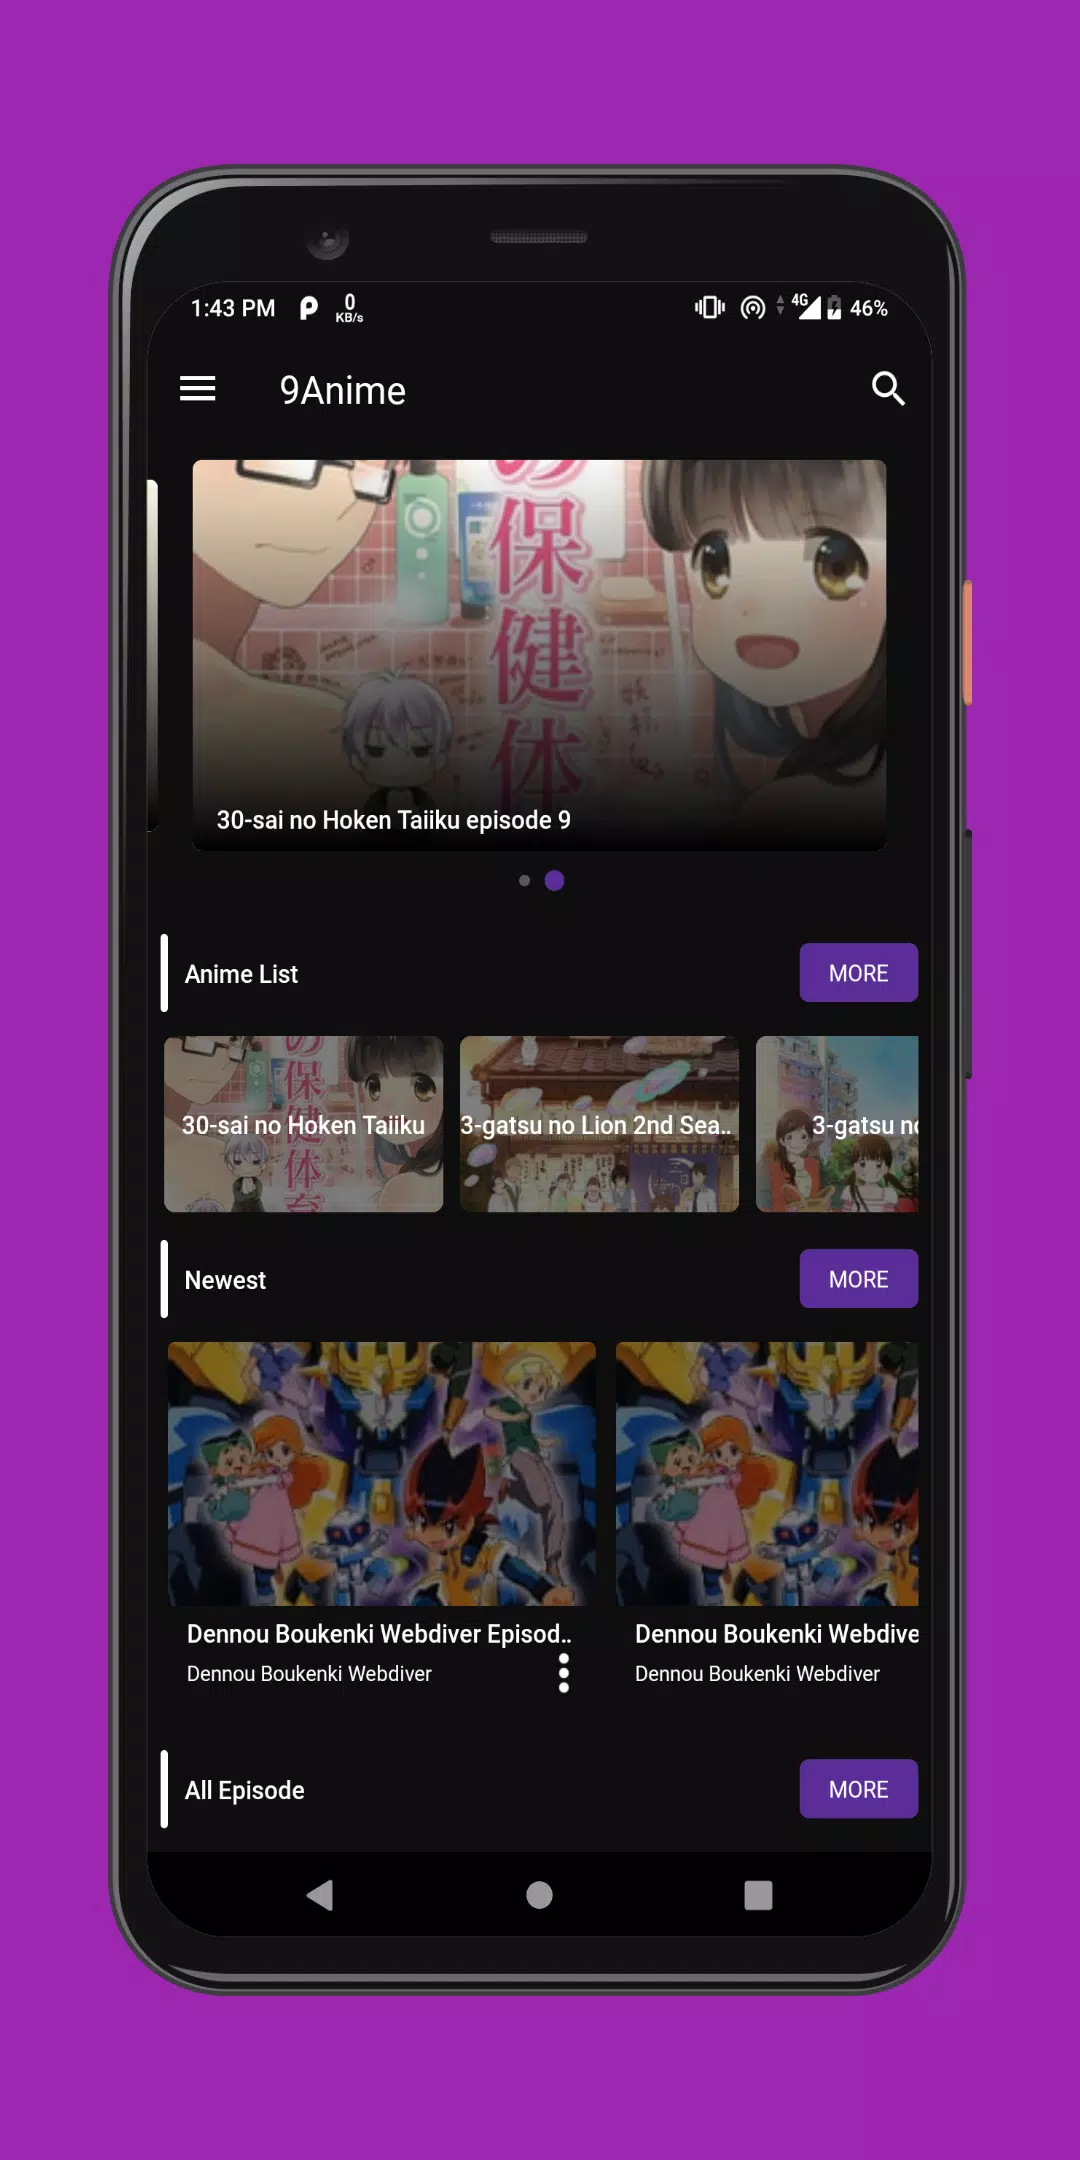 9anime app seems to be broken on android for me, happened today